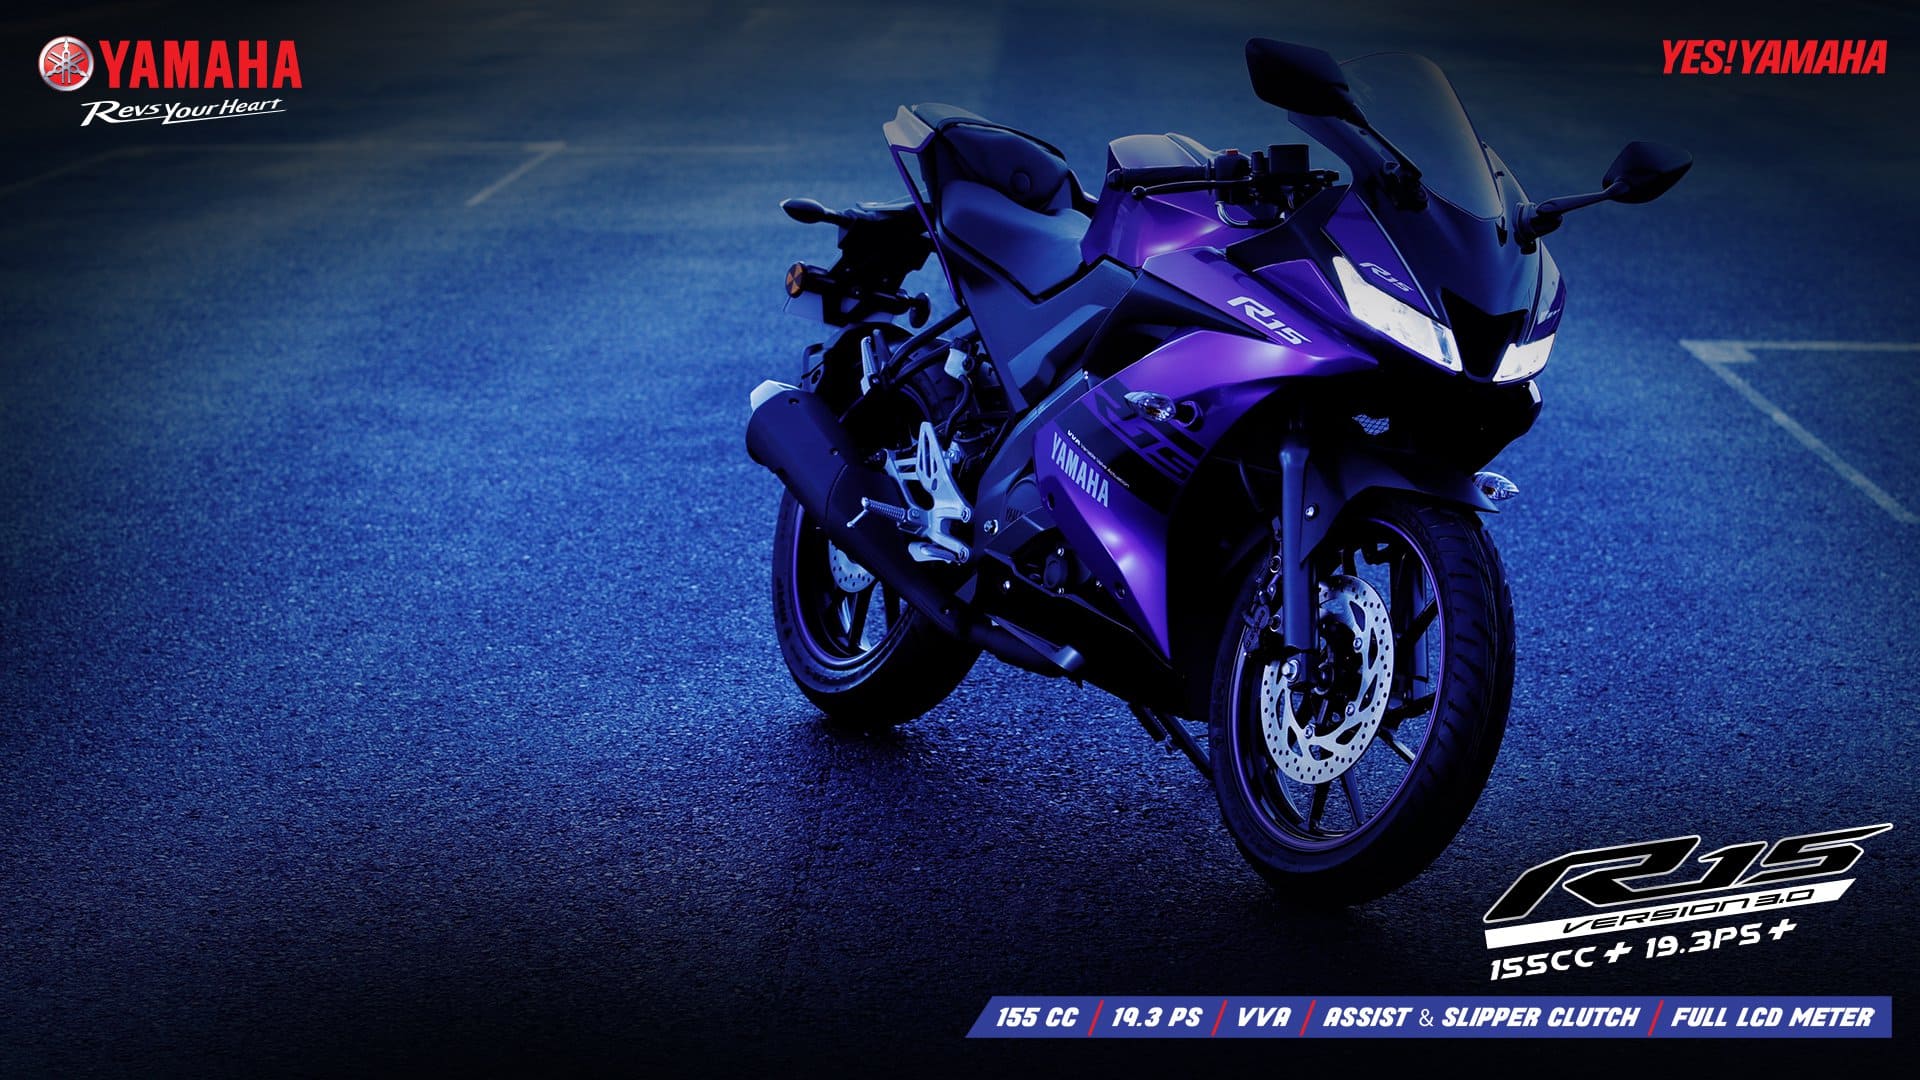 Yamaha R15 Version 3.0 - What's New?